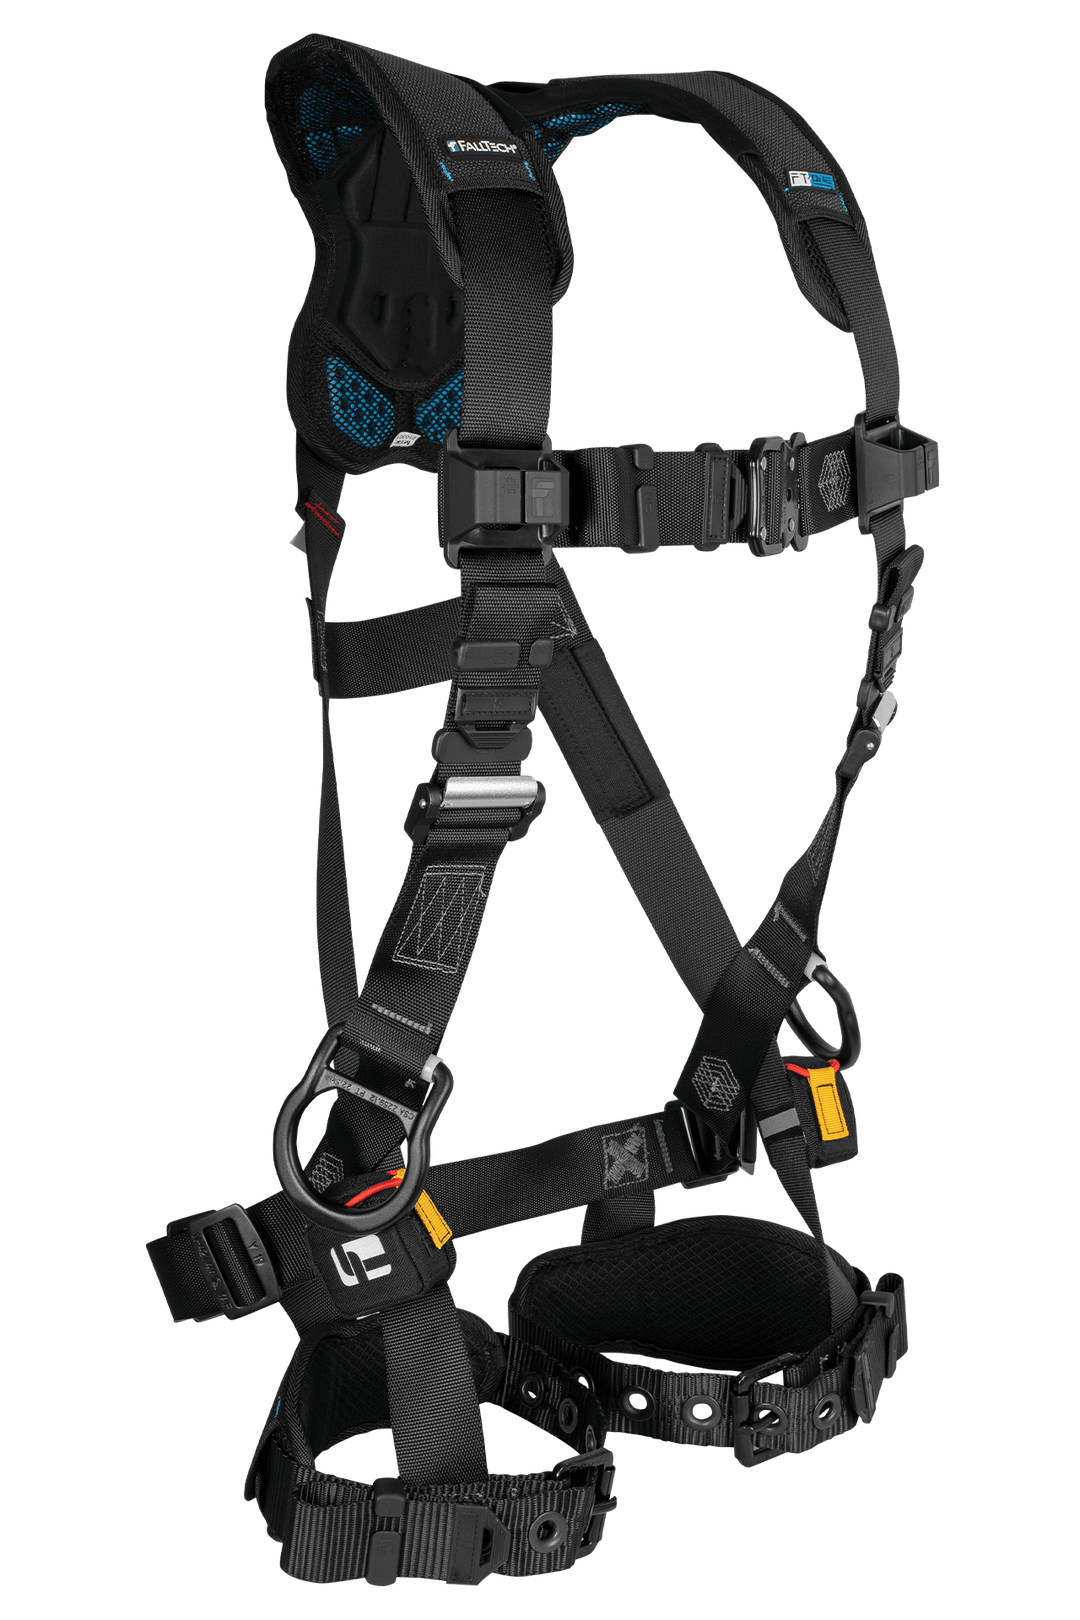 FALLTECH FT-ONE FIT™ 3D Standard Non-Belted Women's Full Body Harness, Tongue Buckle Leg Adjustments